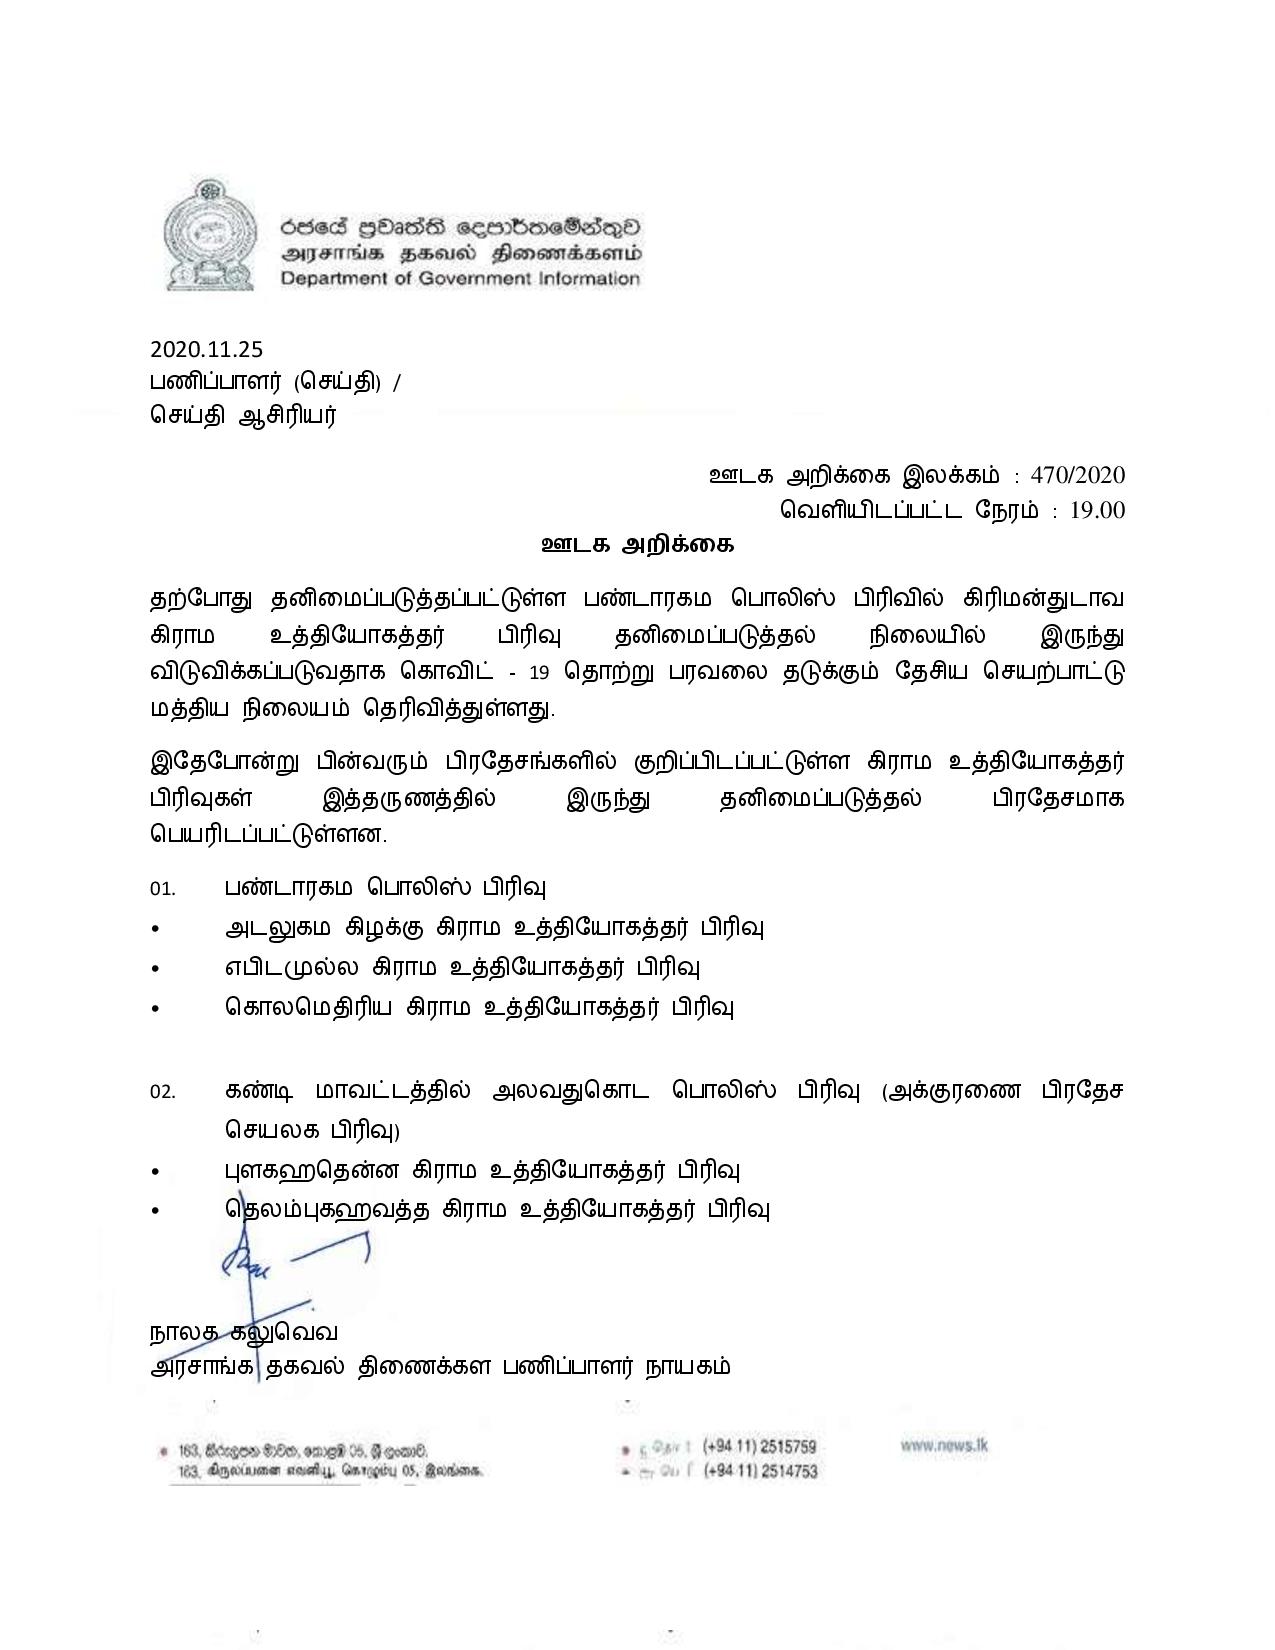 Press Release 470 Tamil page 001